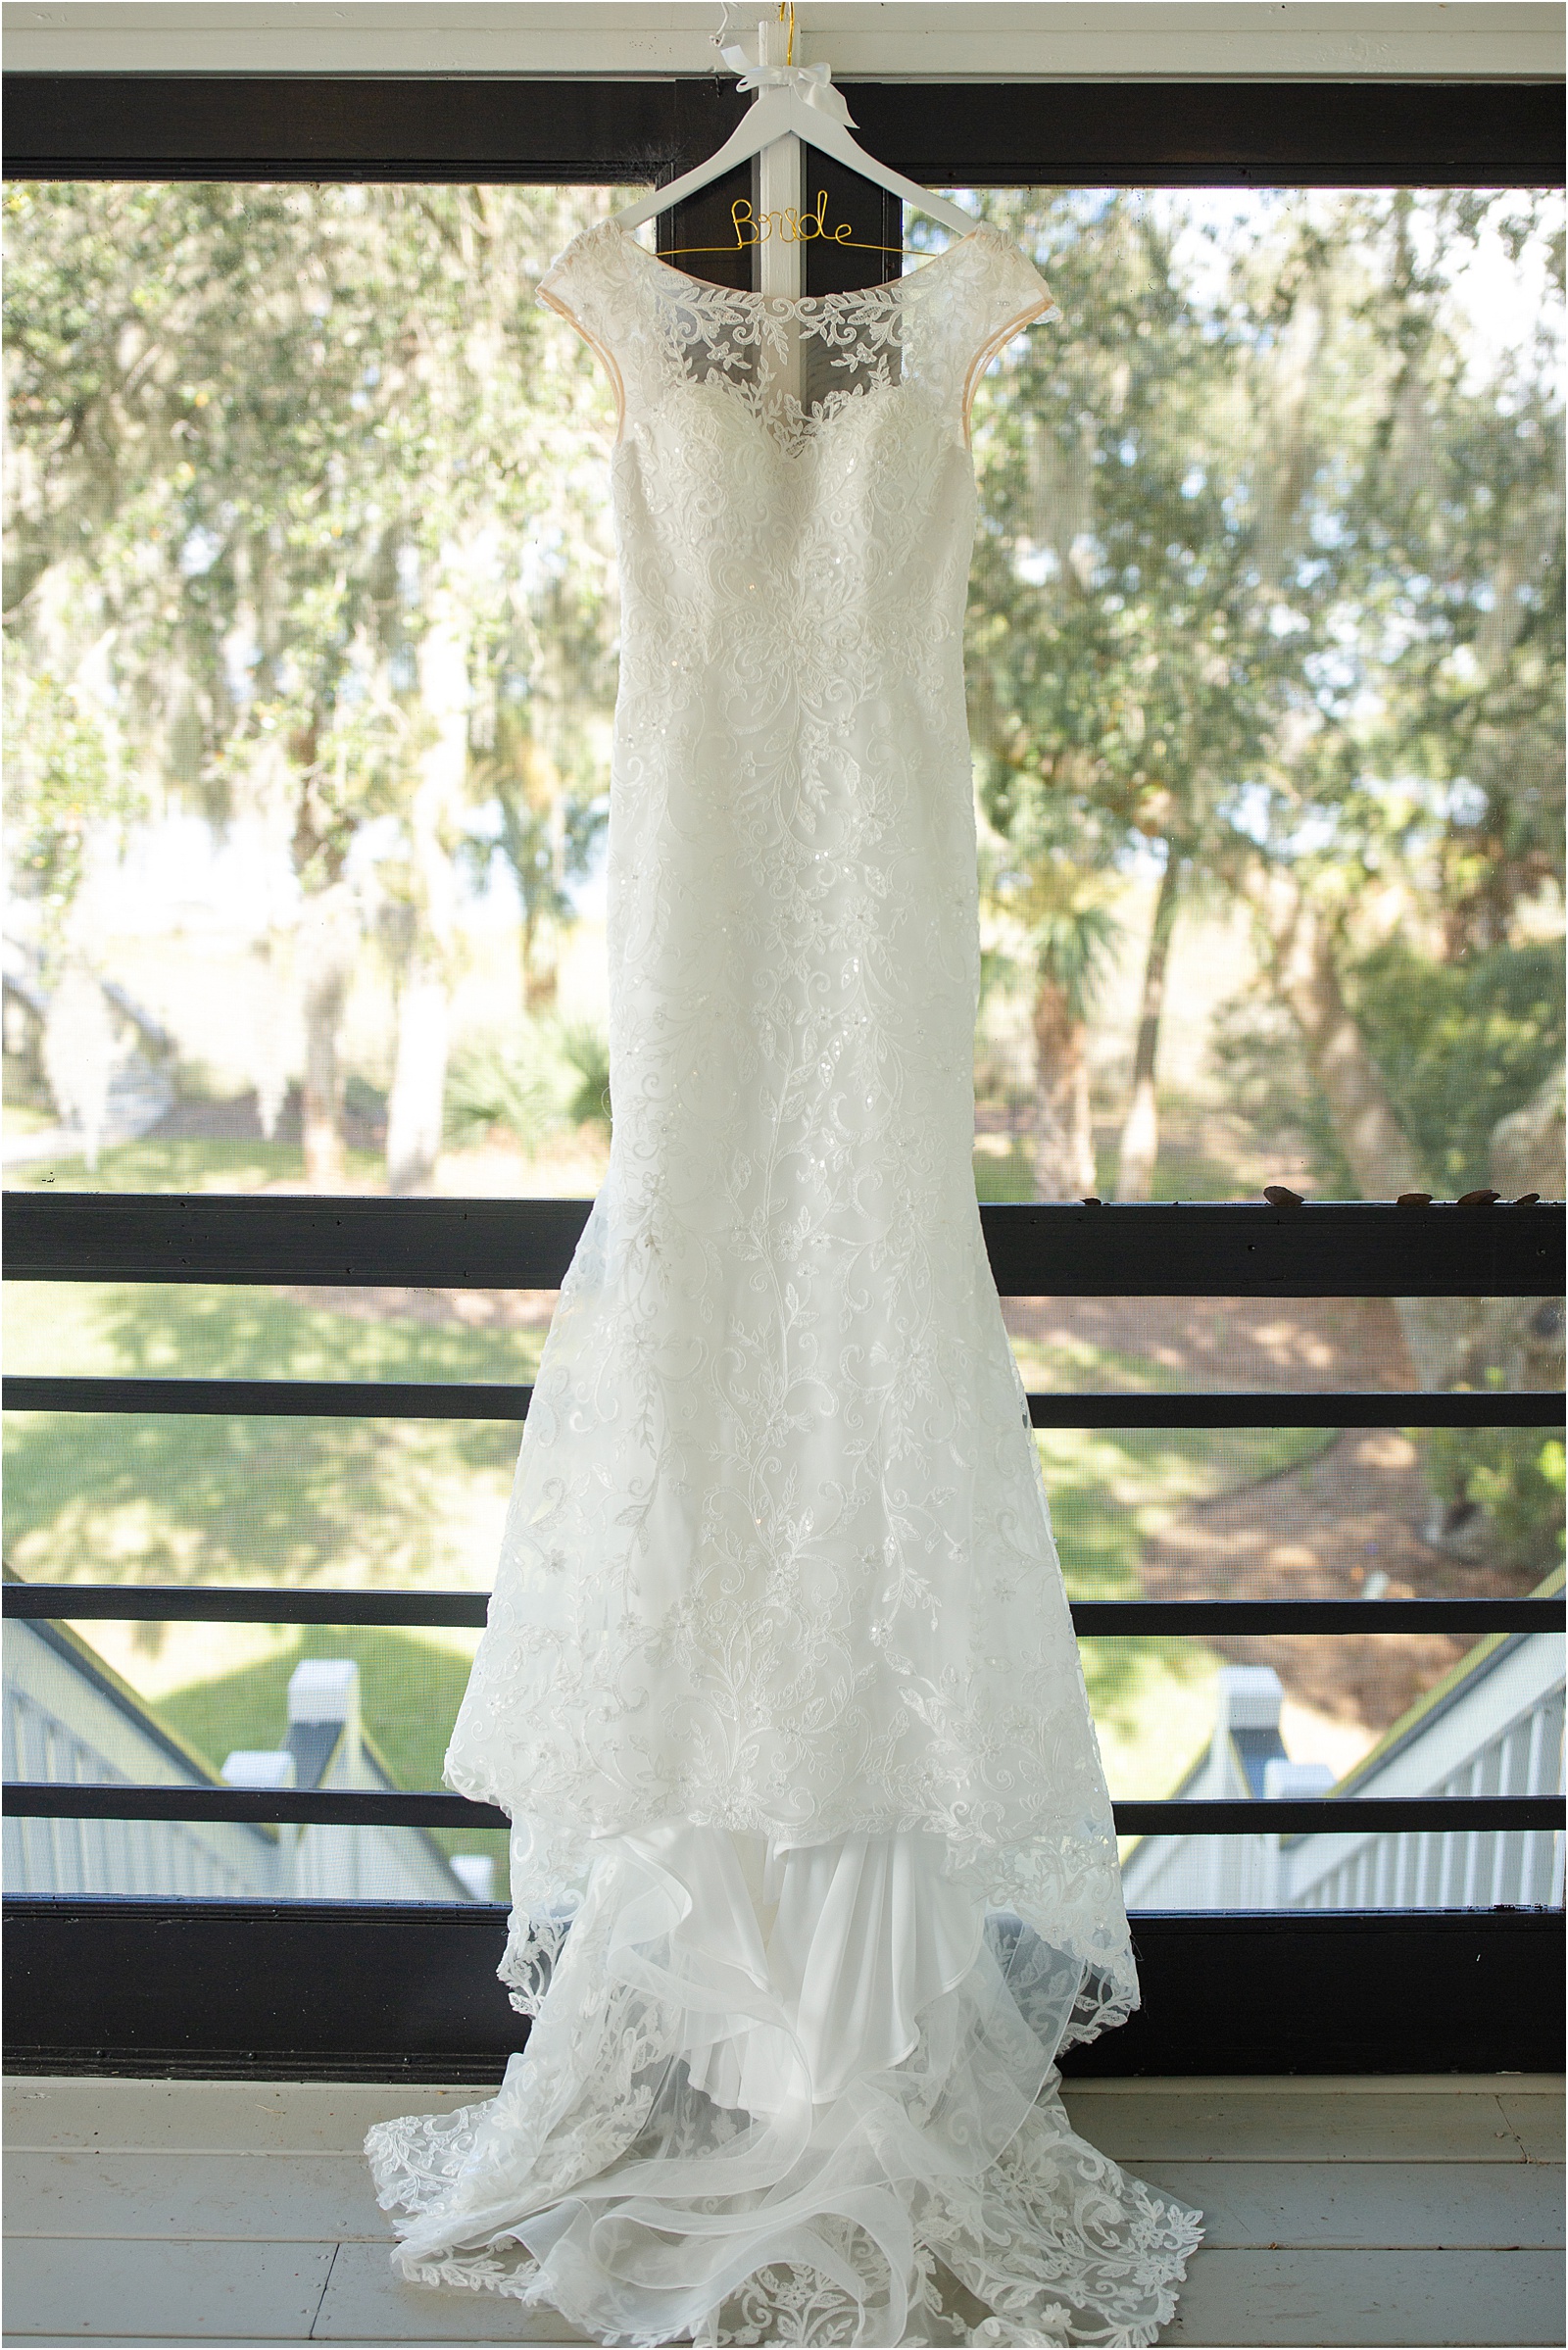 bridal gown hanging on a porch by the water